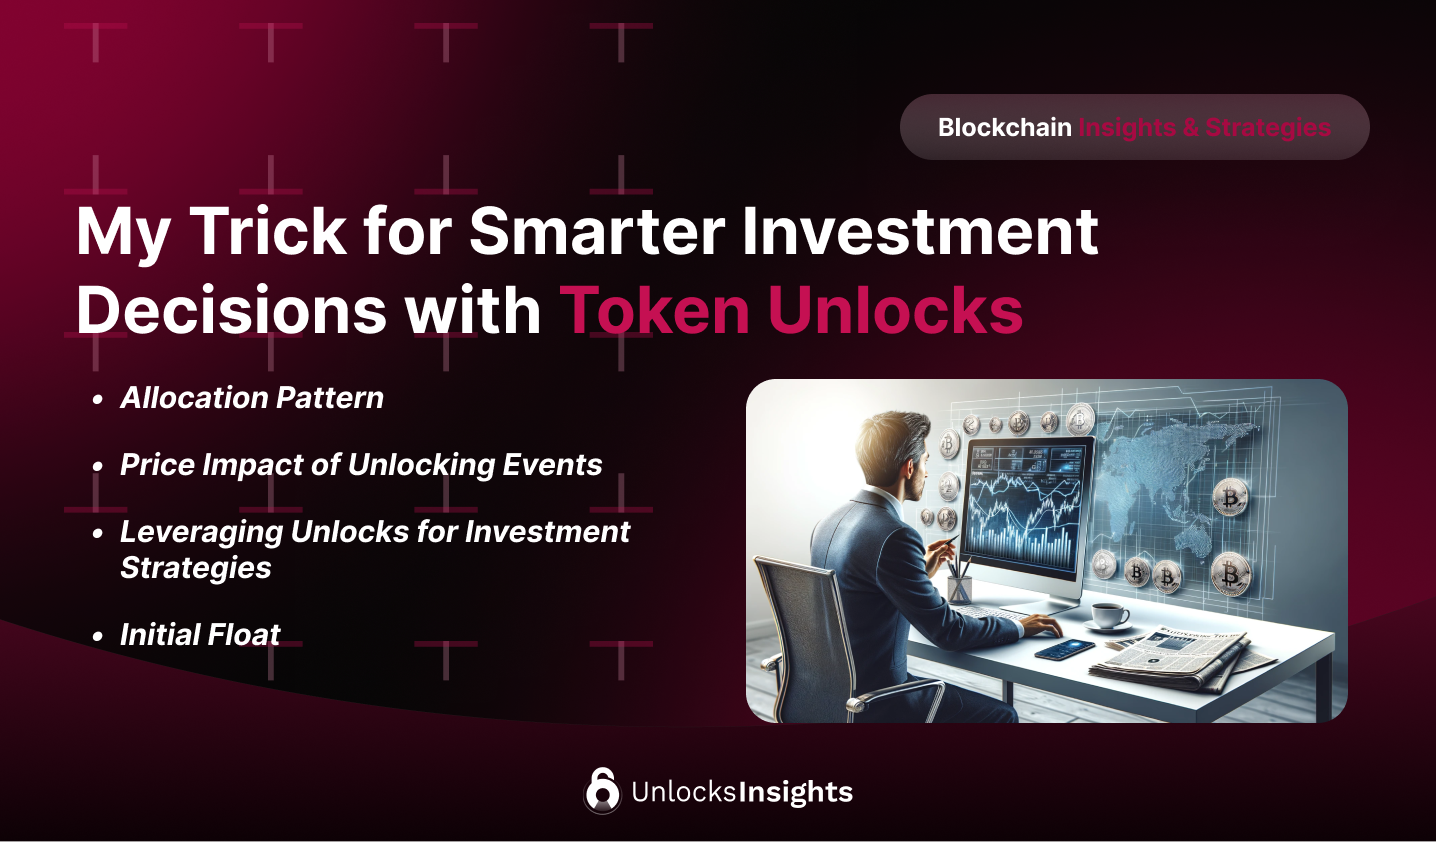 My Trick for Smarter Investment Decisions with Token Unlocks